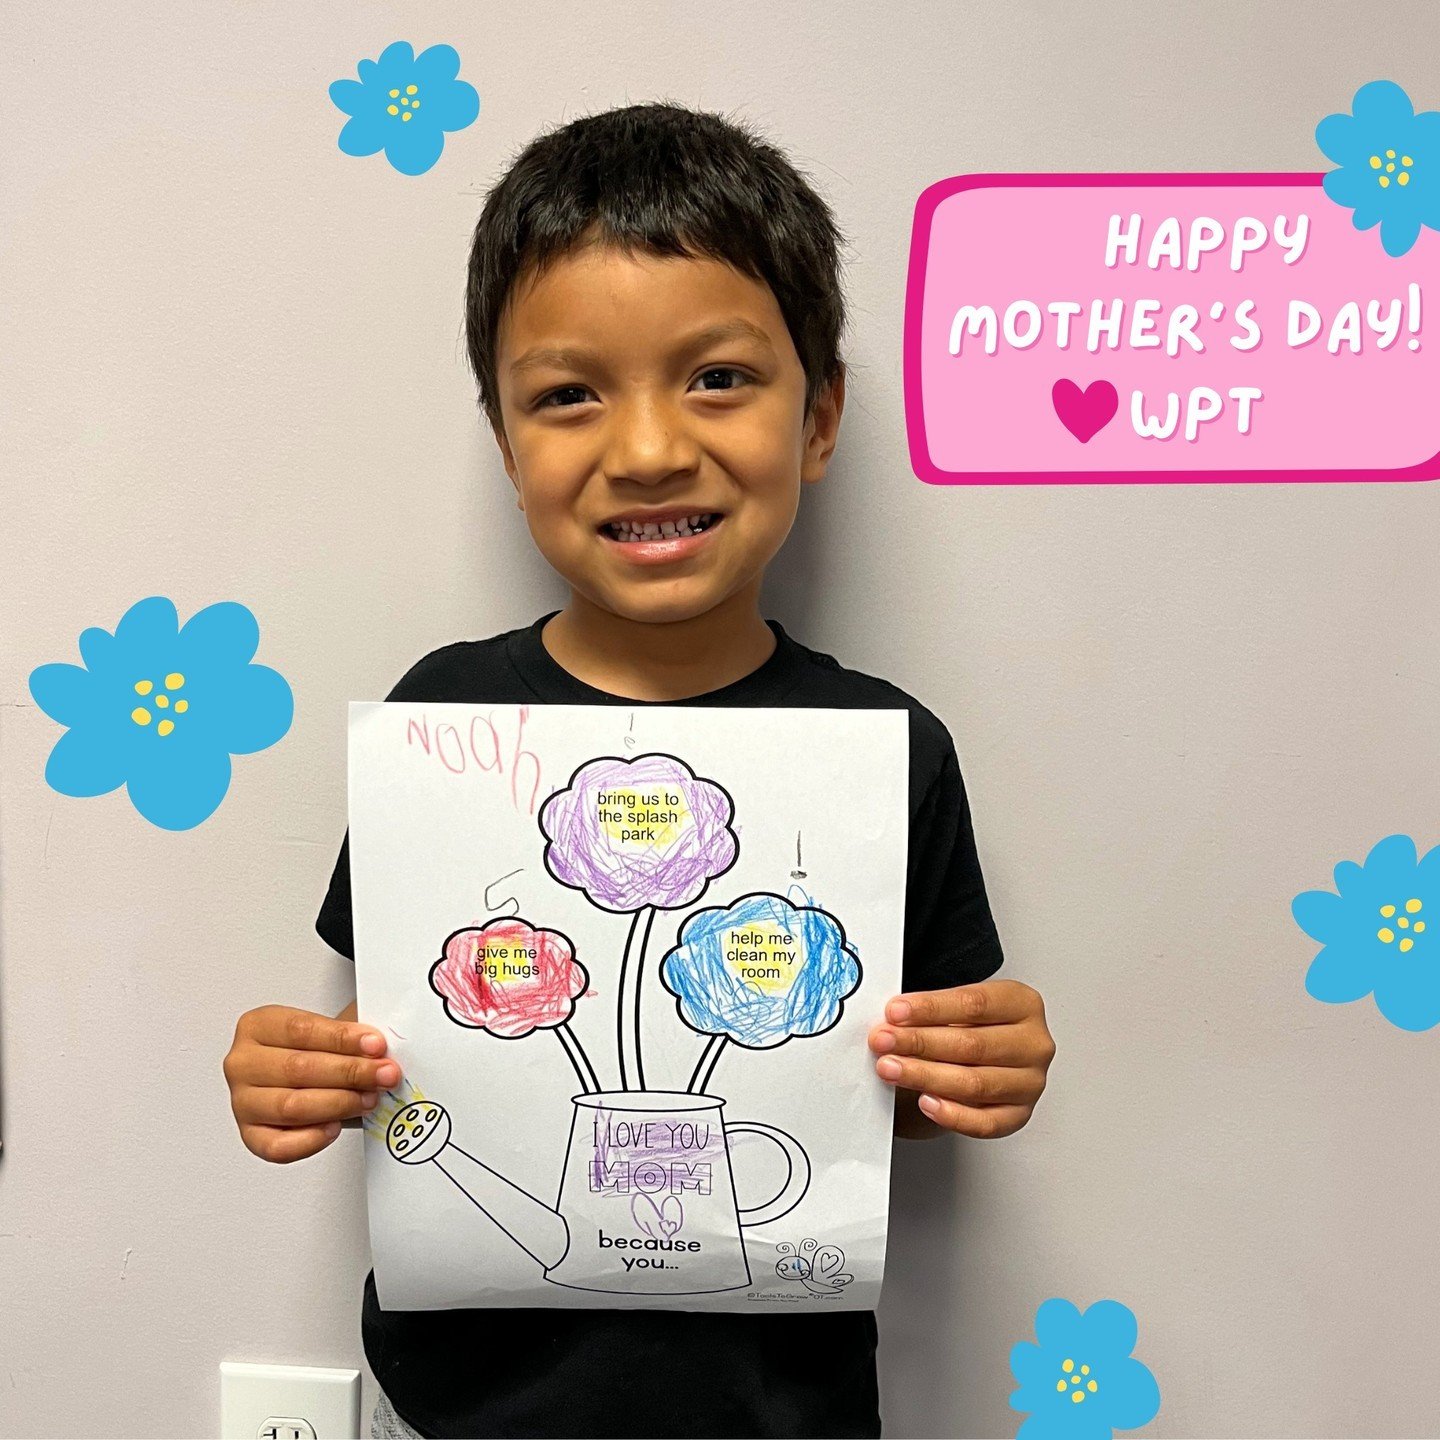 Happy Mother's Day from our WPT family to yours!🌷 Check out what each of these precious kiddos had to say about why they loved their mommas!💞

#WilsonPediatricTherapy #WPT #HappyMothersDay #MothersDay #OccupationalTherapy #PediatricOccupationalTher